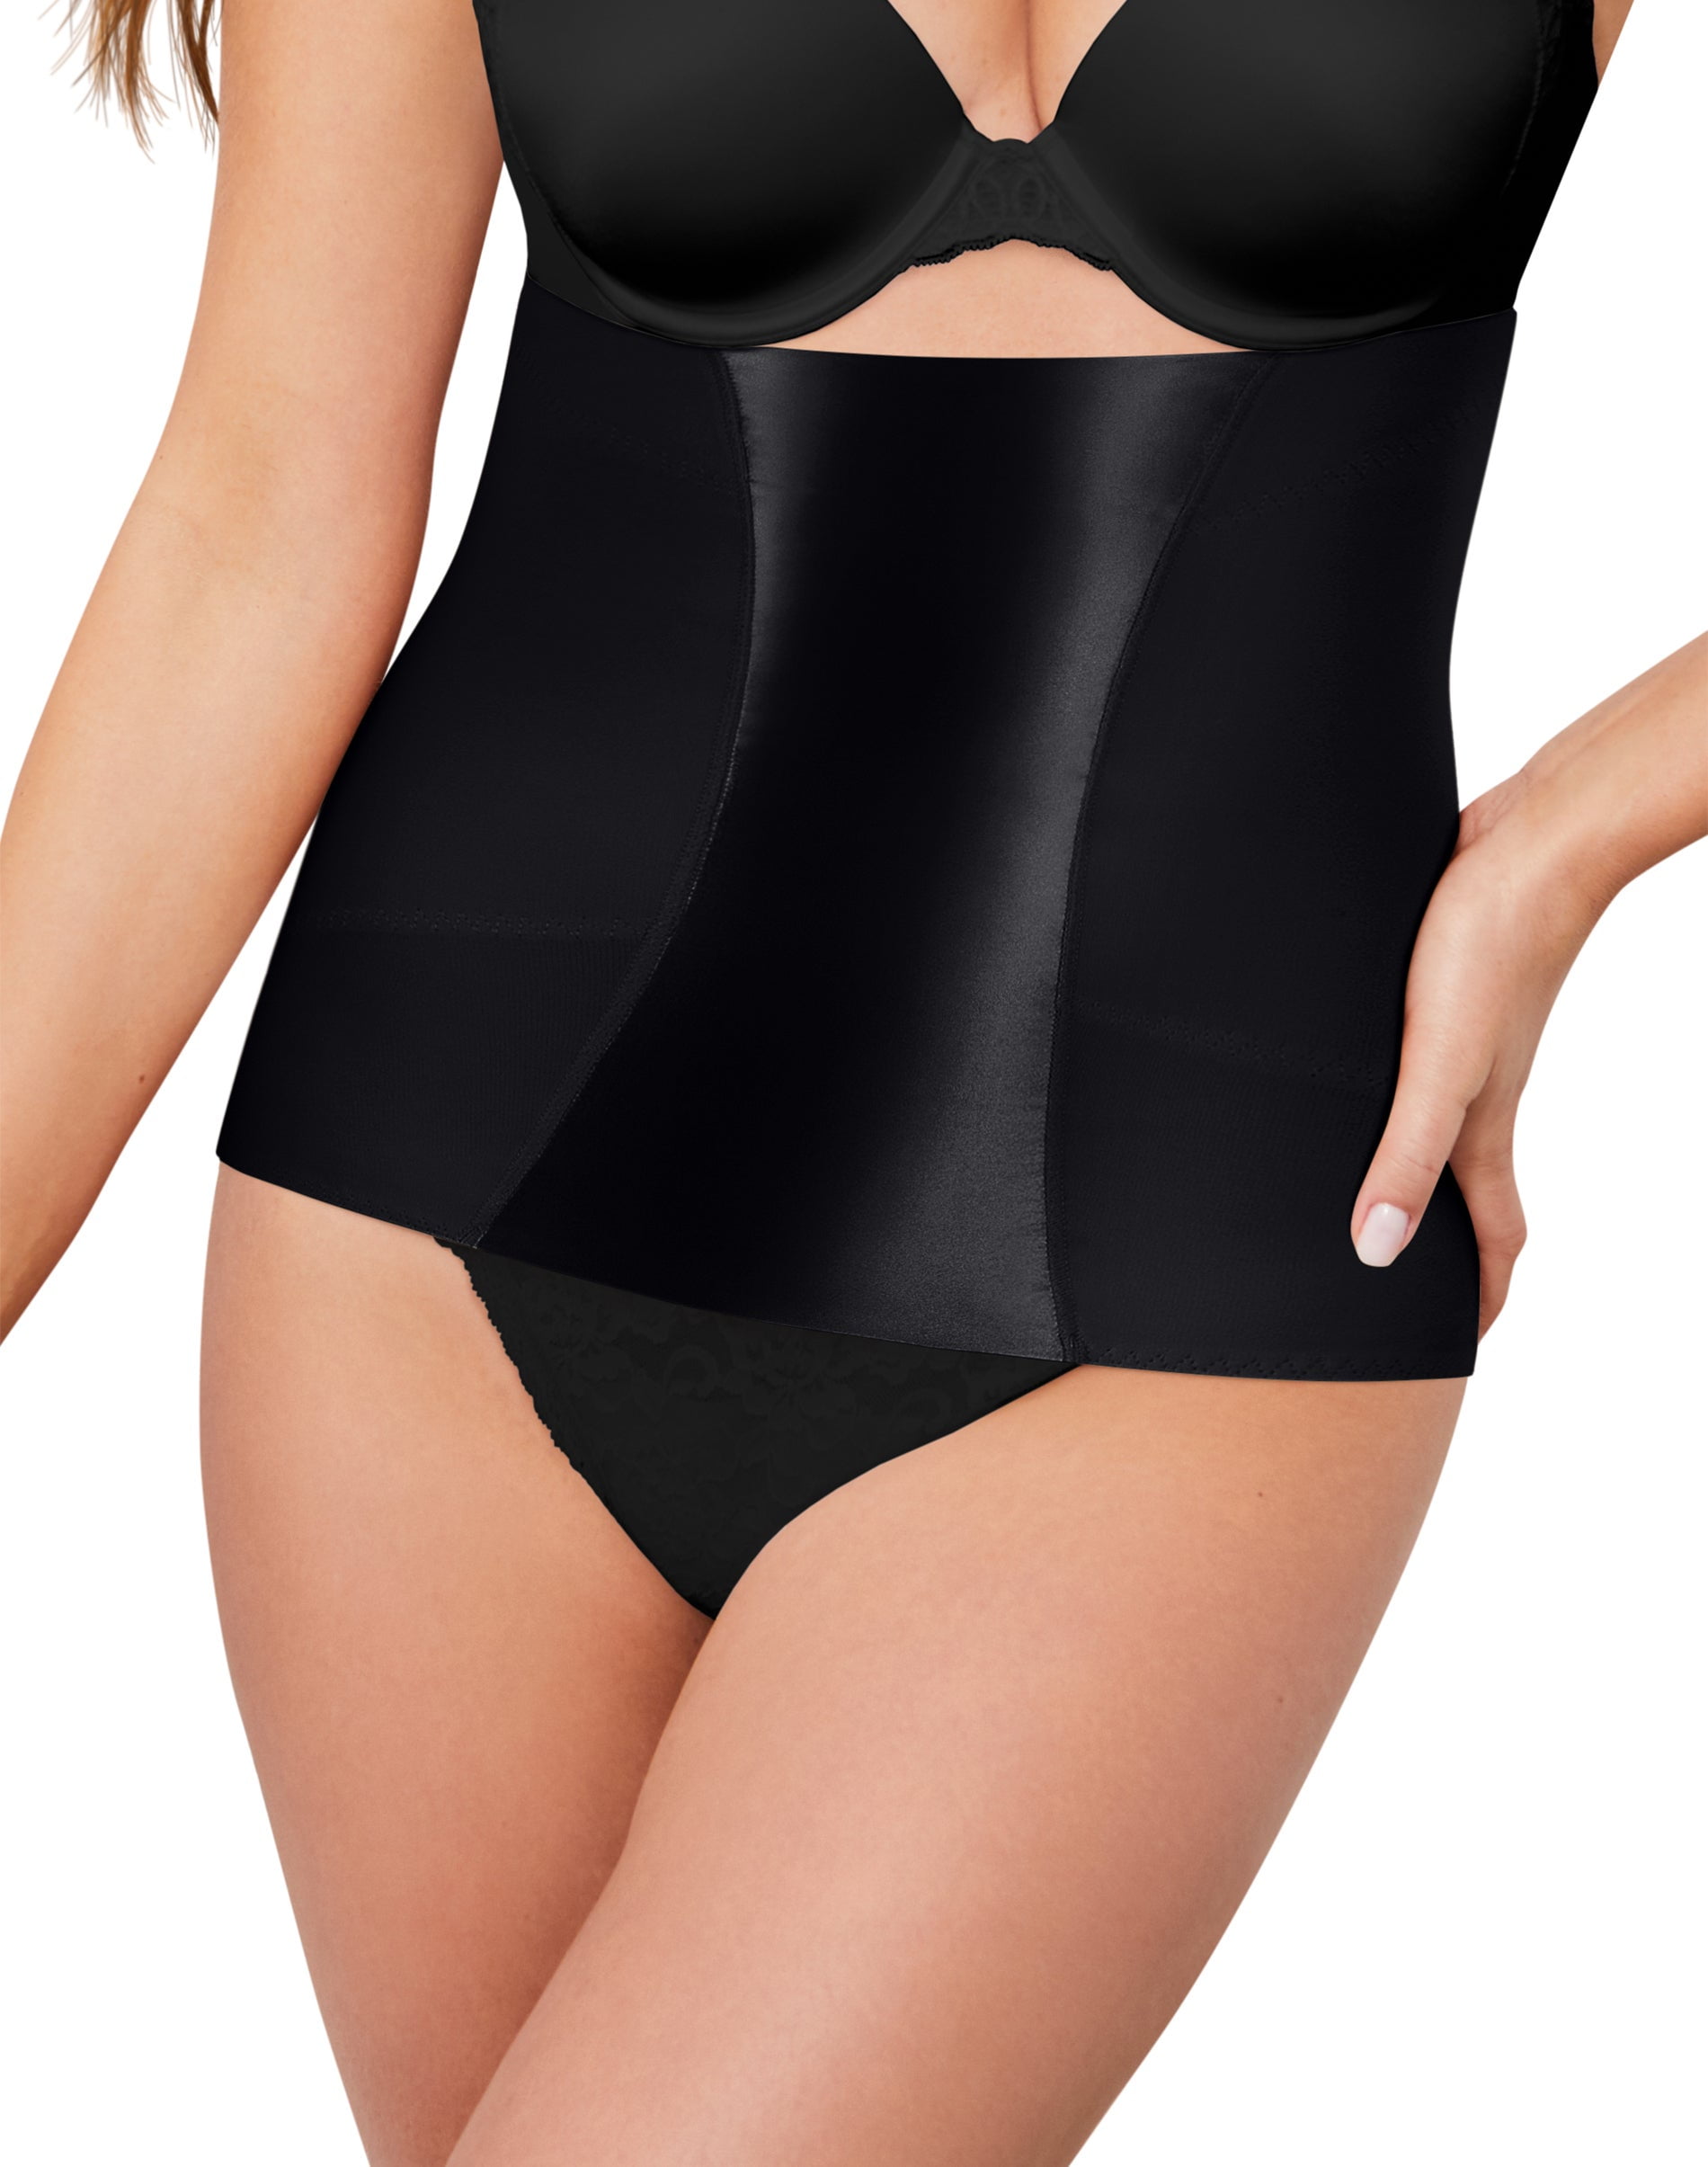 Pour Moi Hourglass Firm Control Back Smoothing Waist Cincher - Black